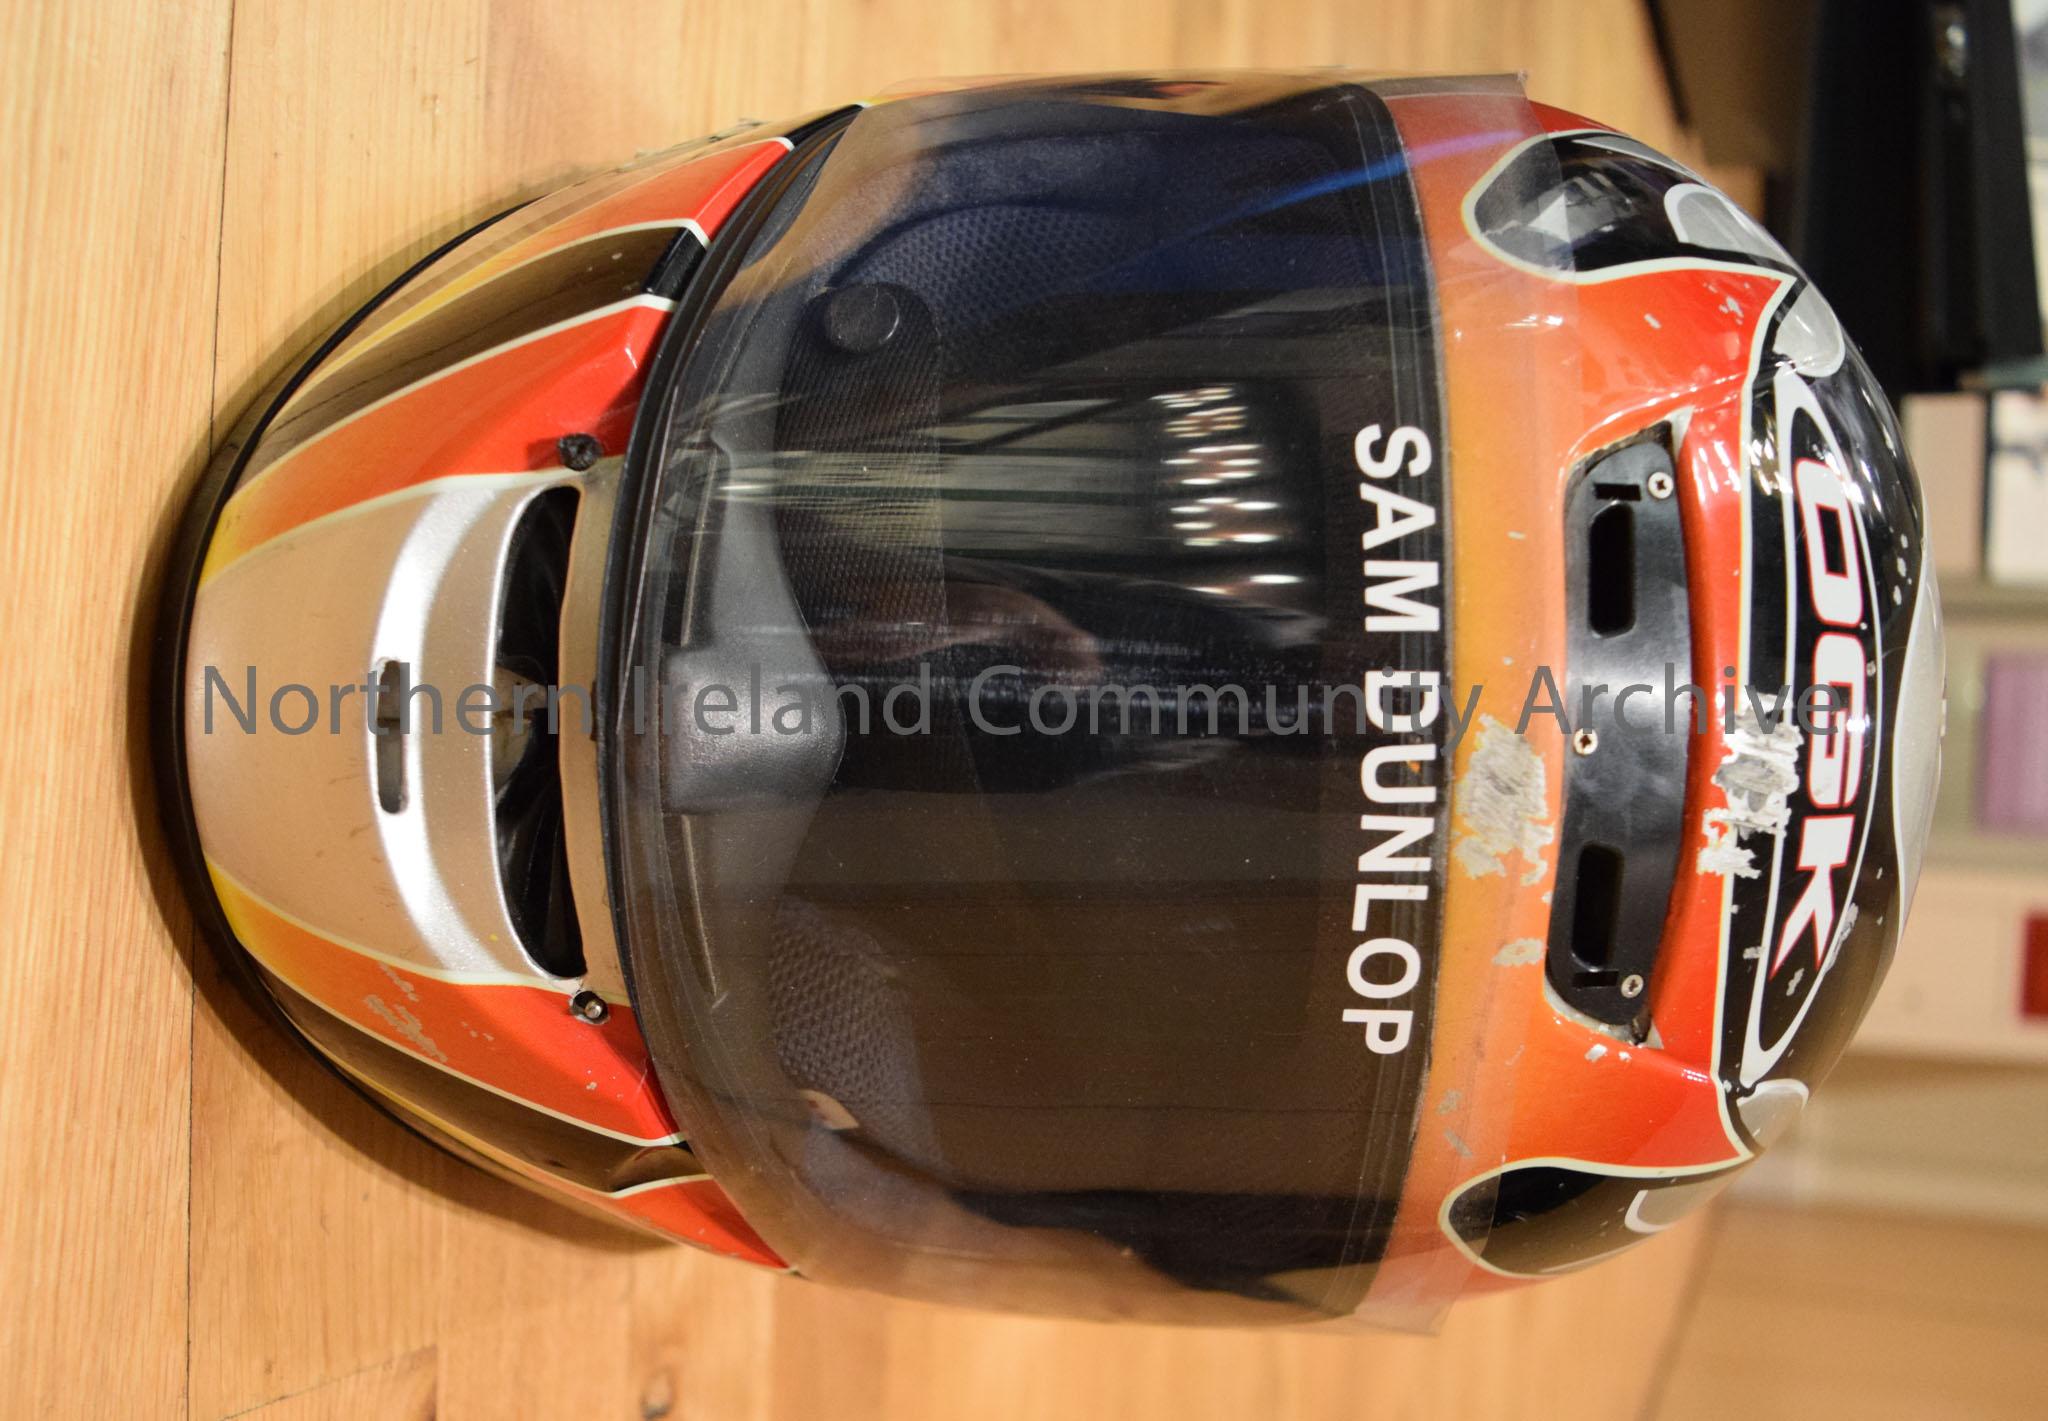 OGK motorcycle helmet belonging to Sam Dunlop. Grey helmet with black stripes and red and orange flame effects on the side and a red and orange curved… – 2016.114 (2)